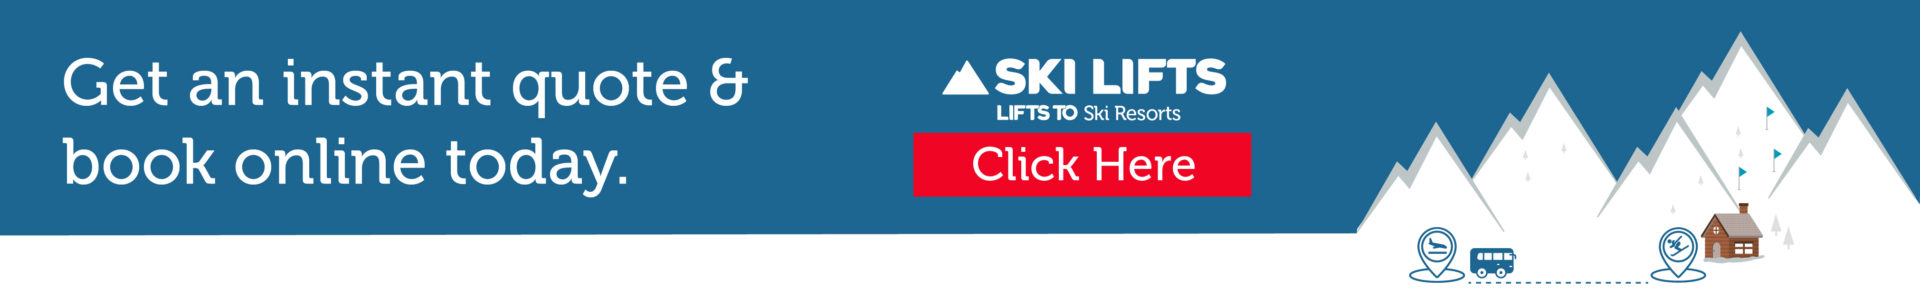 Get a ski transfers quote from Ski-Lifts